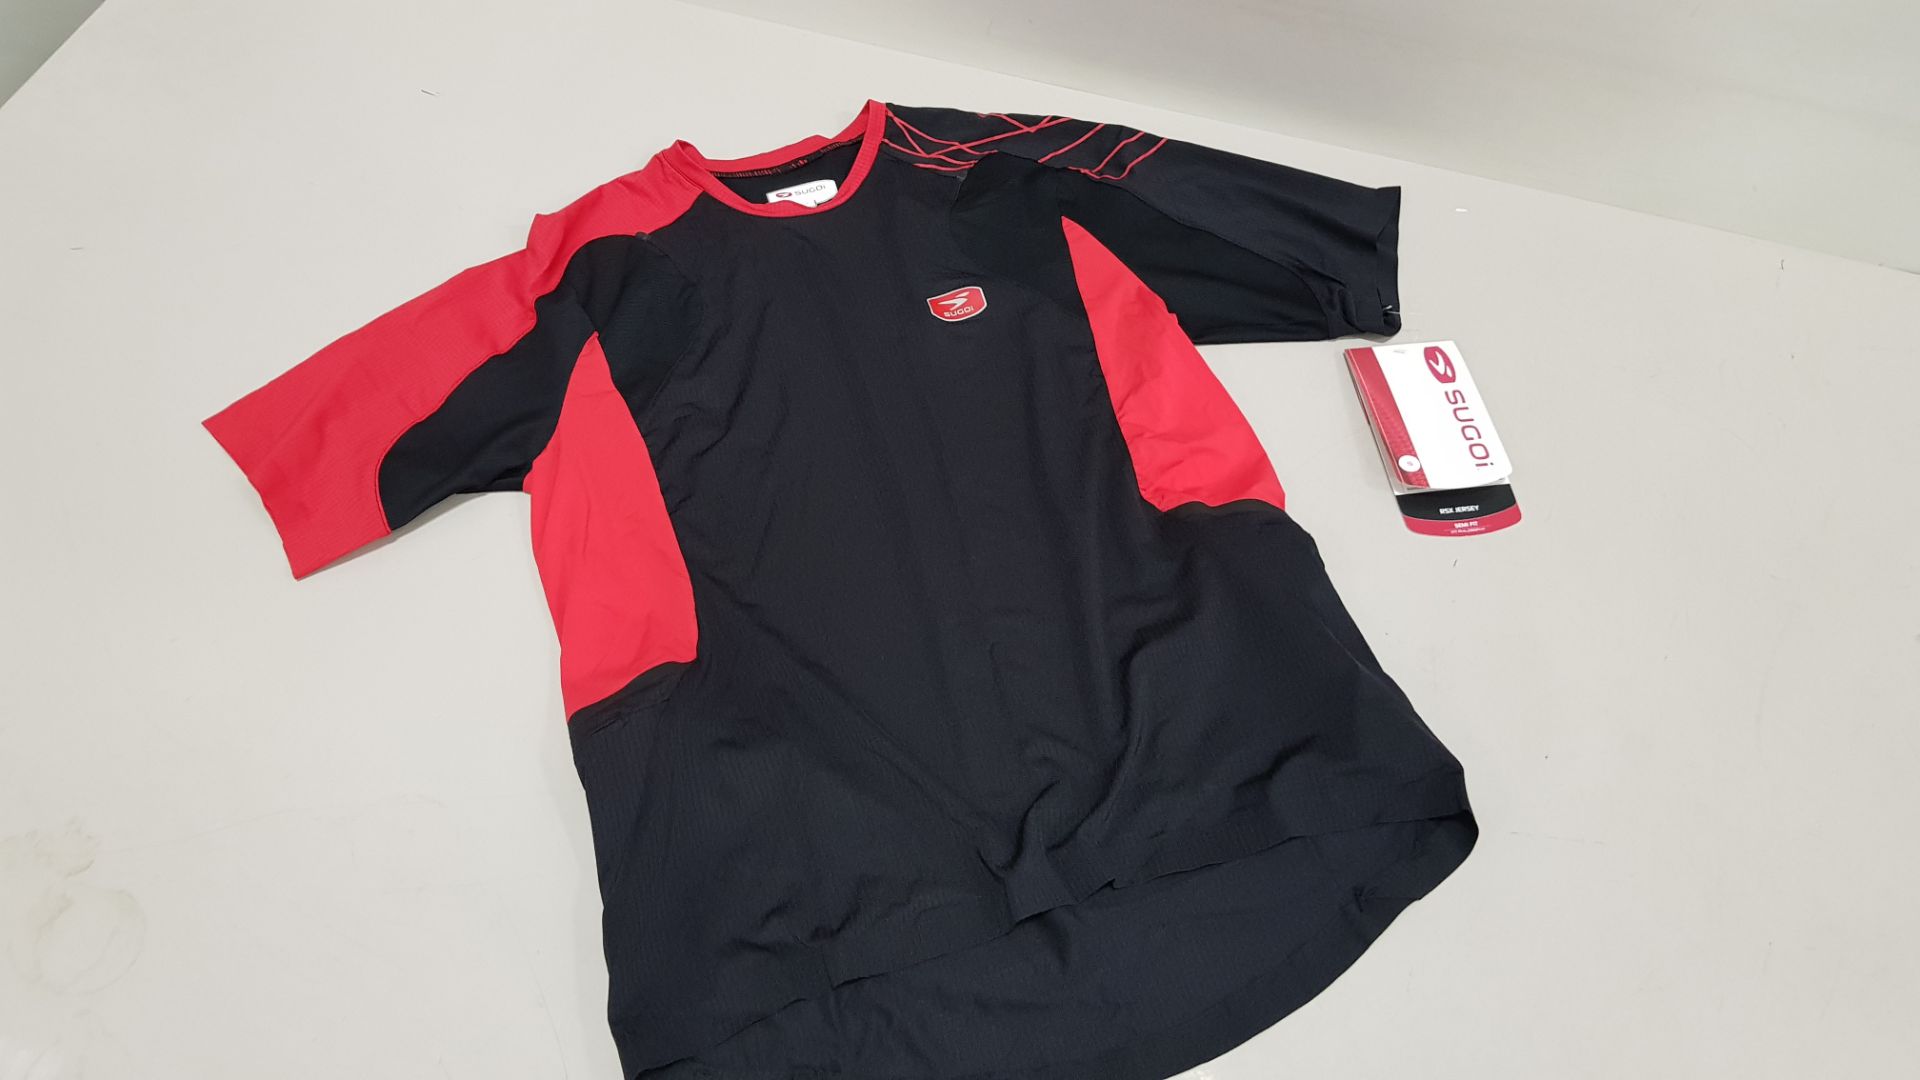 6 X BRAND NEW SUGOI RSX JERSEYS IN BLACK AND RED SIZE SMALL